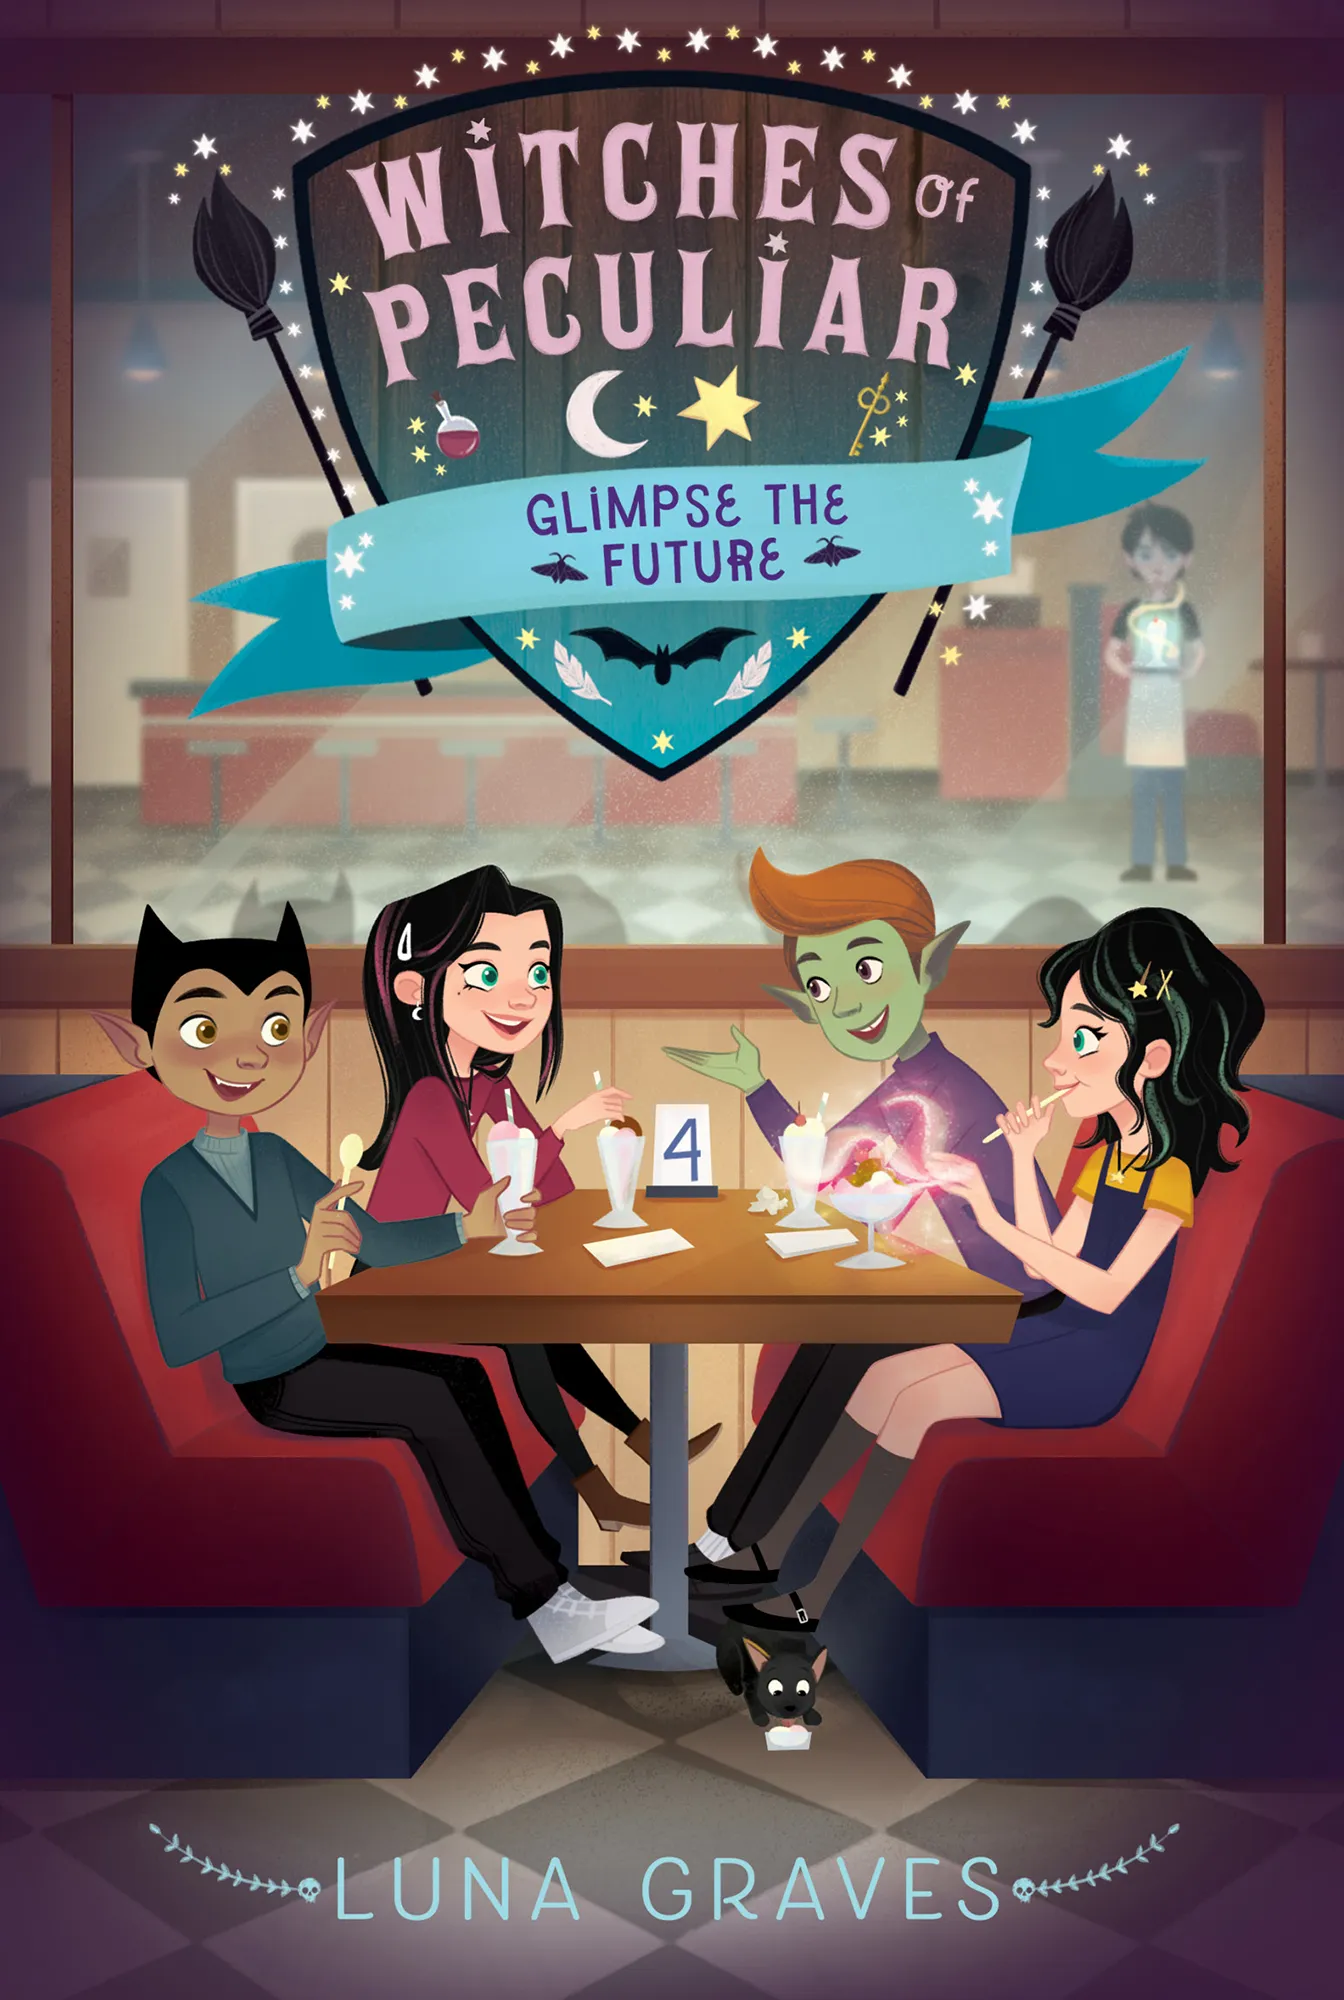 Glimpse the Future (Witches of Peculiar #4)